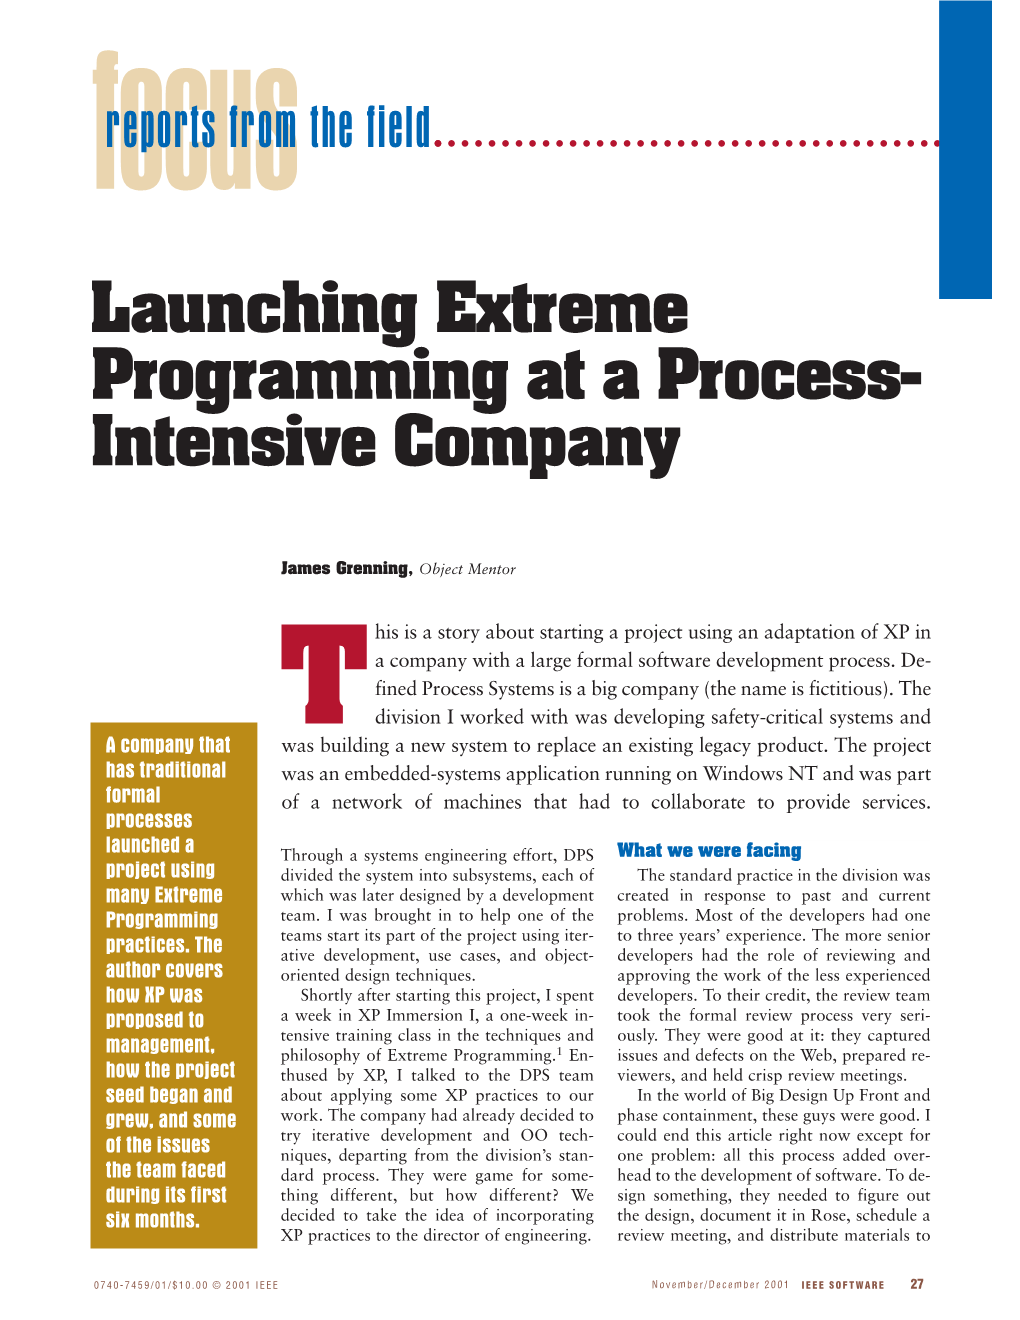 Launching Extreme Programming at a Process-Intensive Company